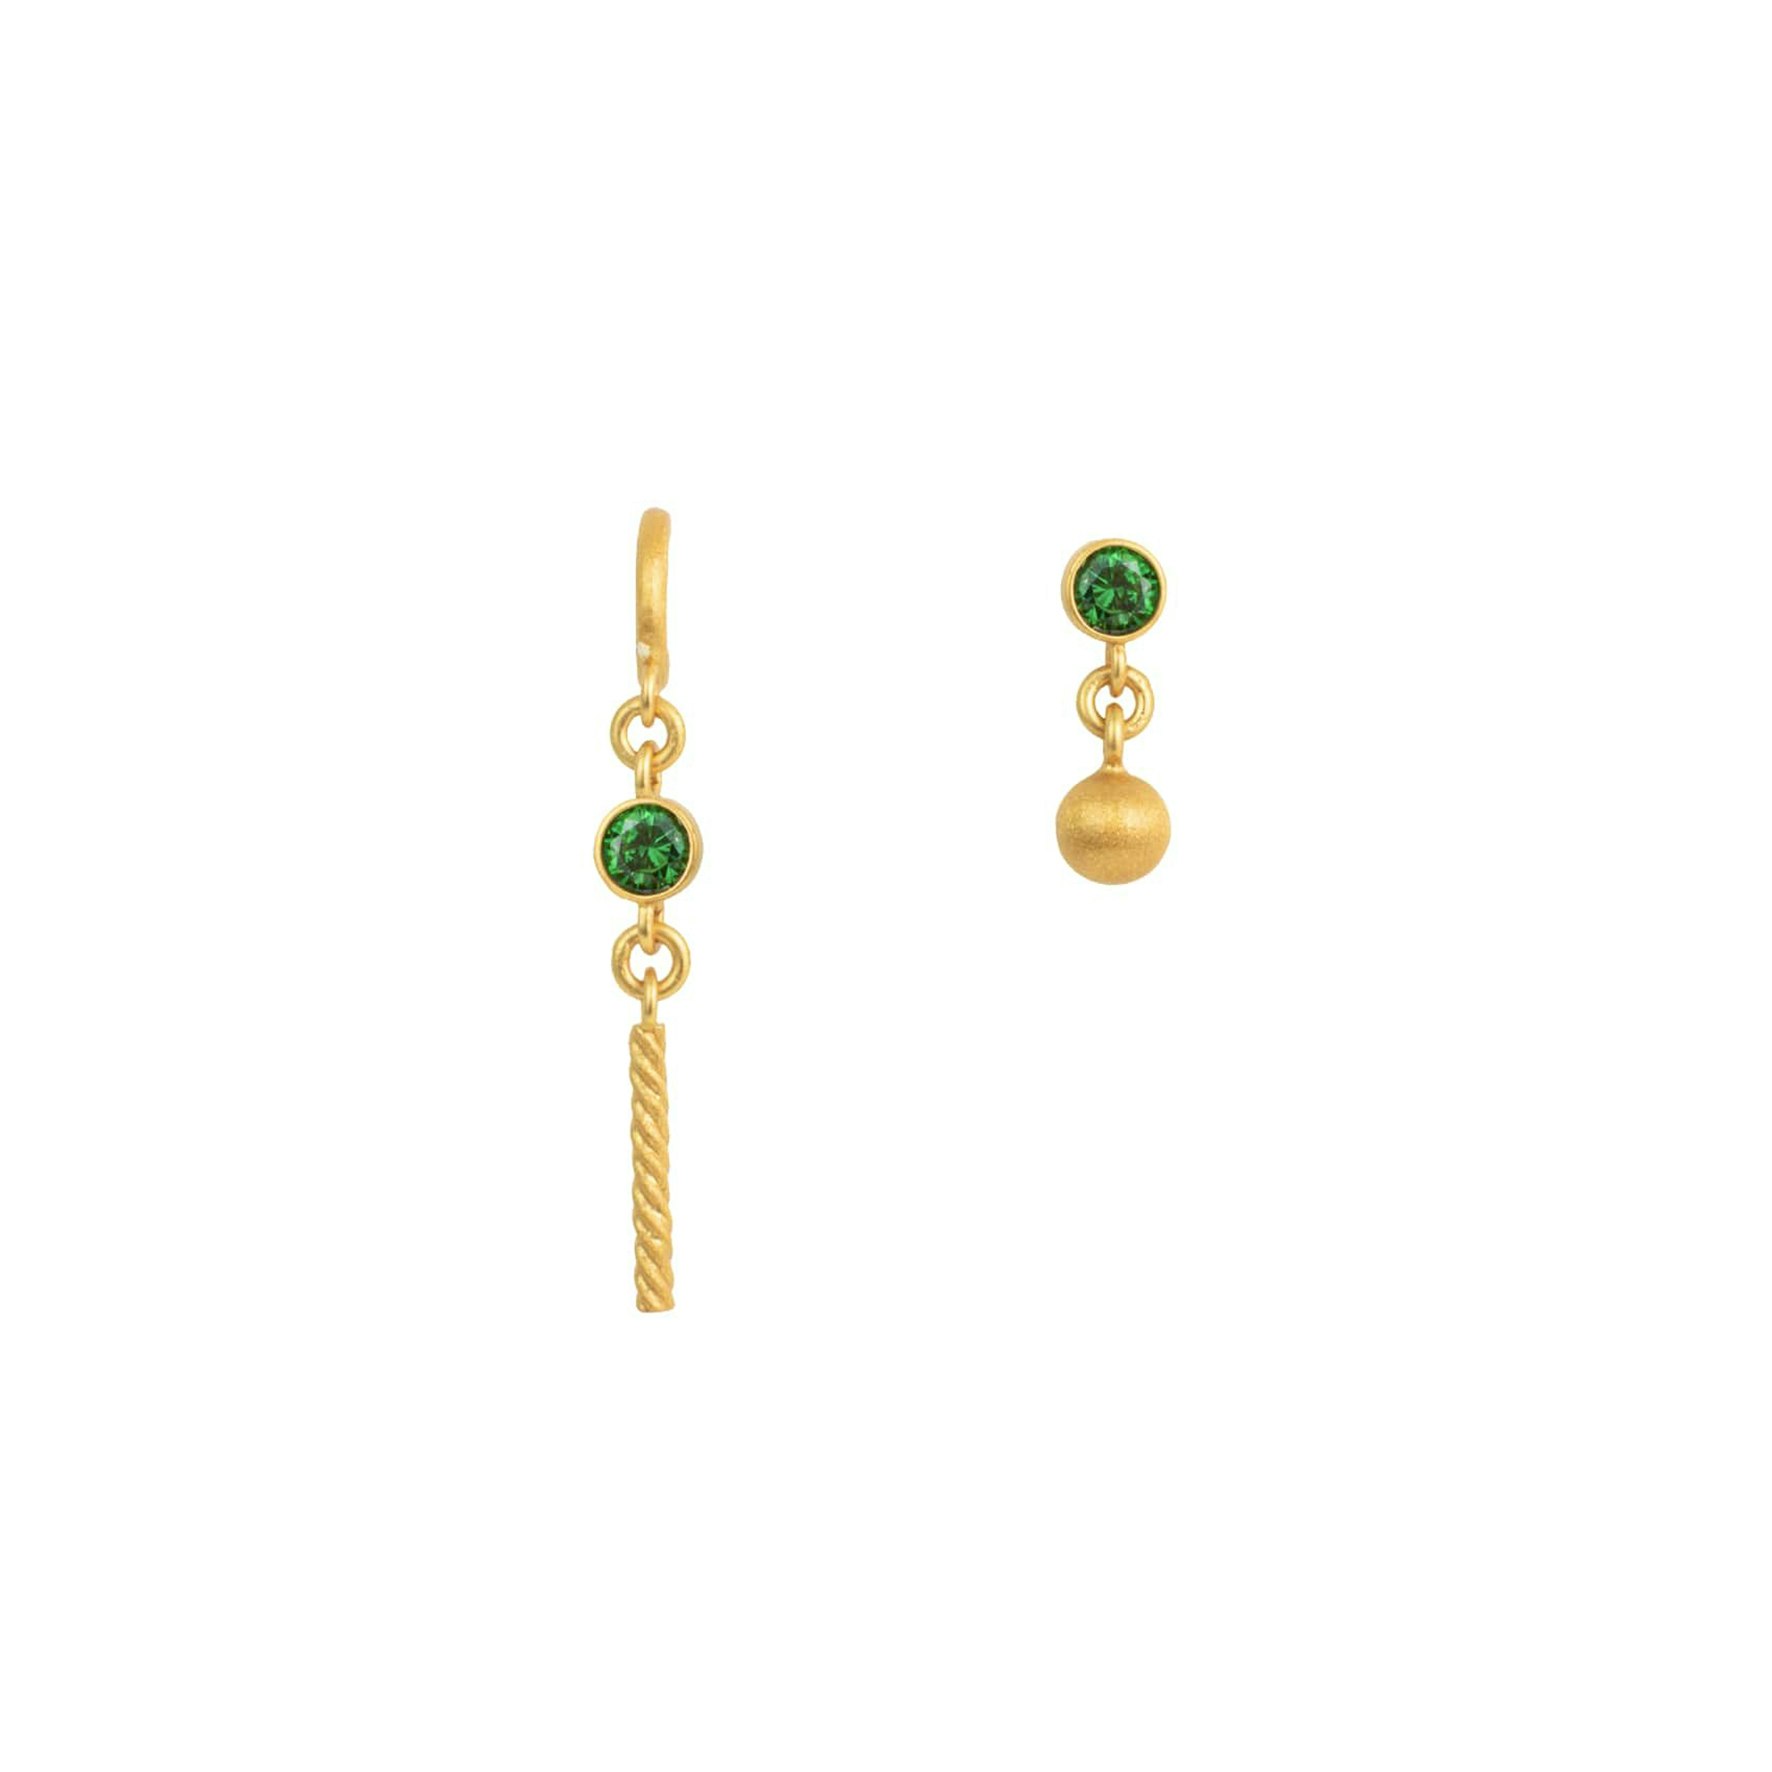 Candy Curse Earrings from House Of Vincent in Goldplated-Silver Sterling 925